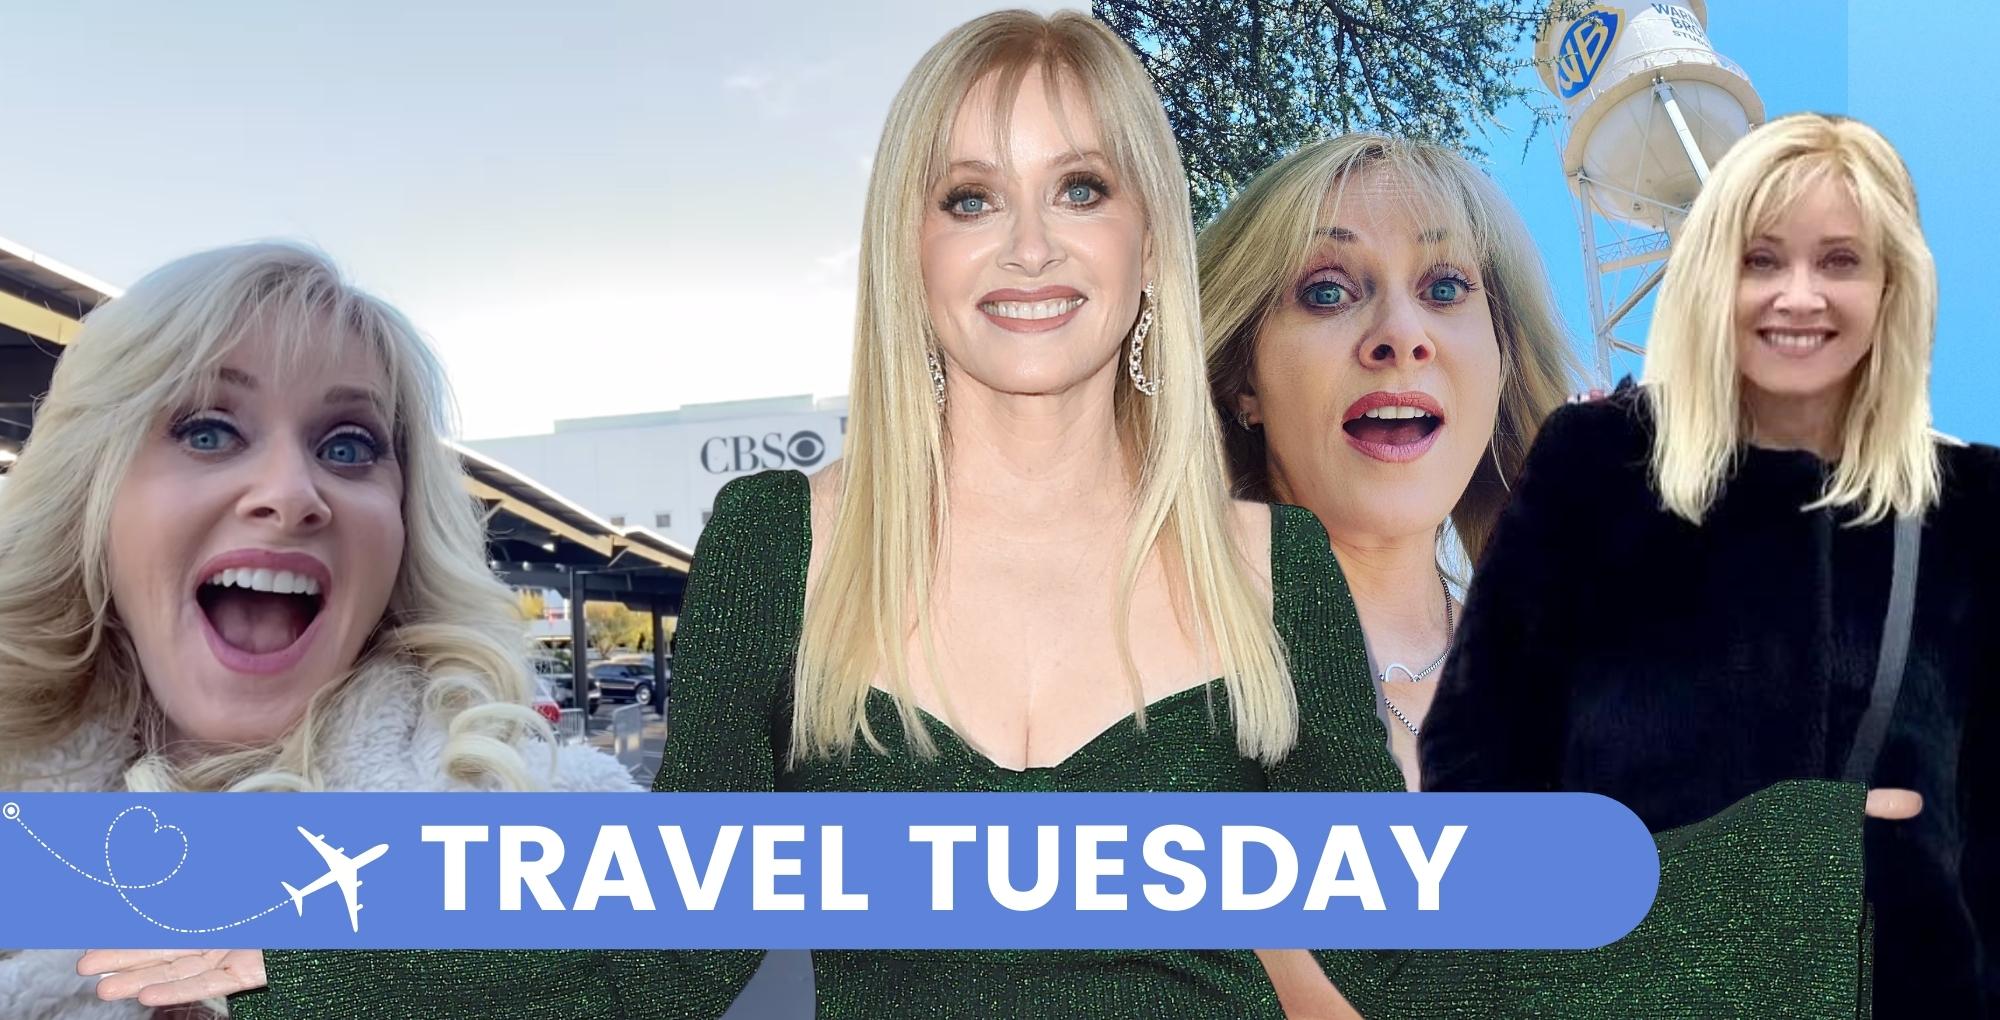 barbara crampton travel tuesday young and the restless.